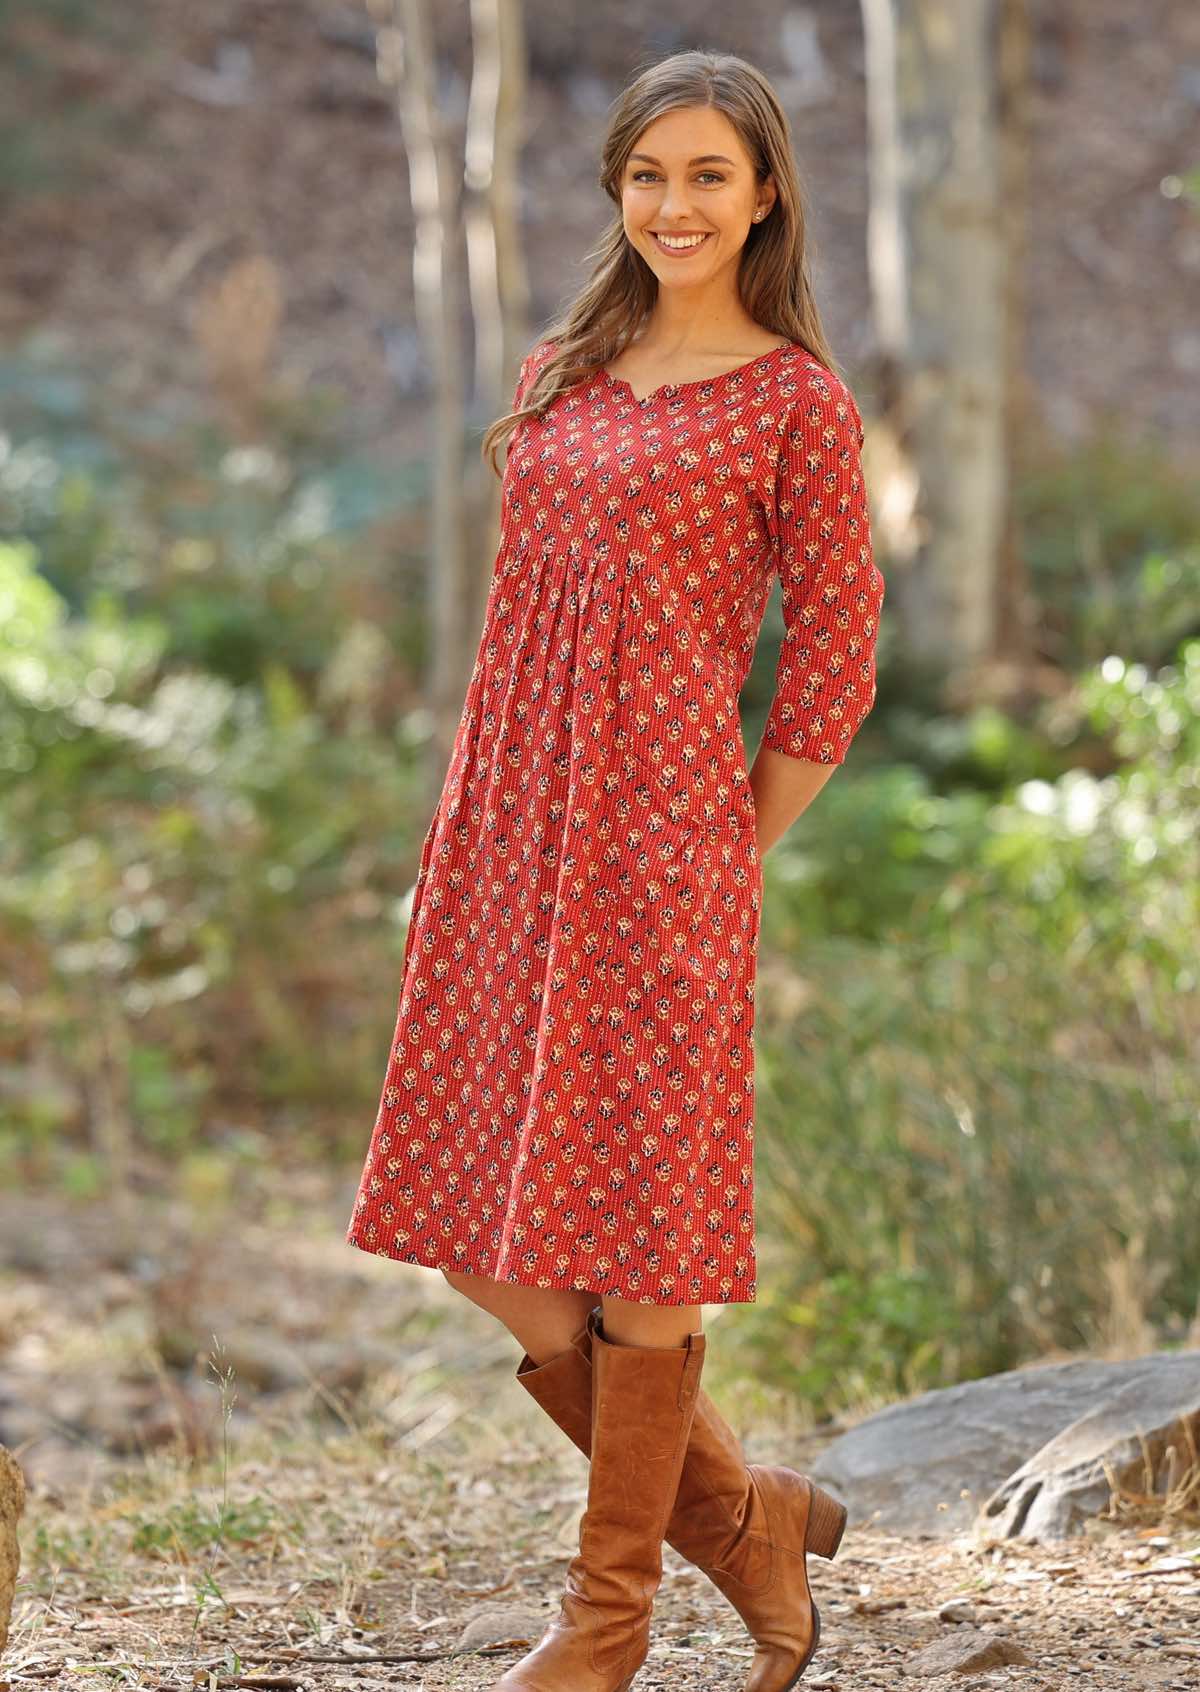 Model pairs 3/4 sleeve cotton dress with boots. 